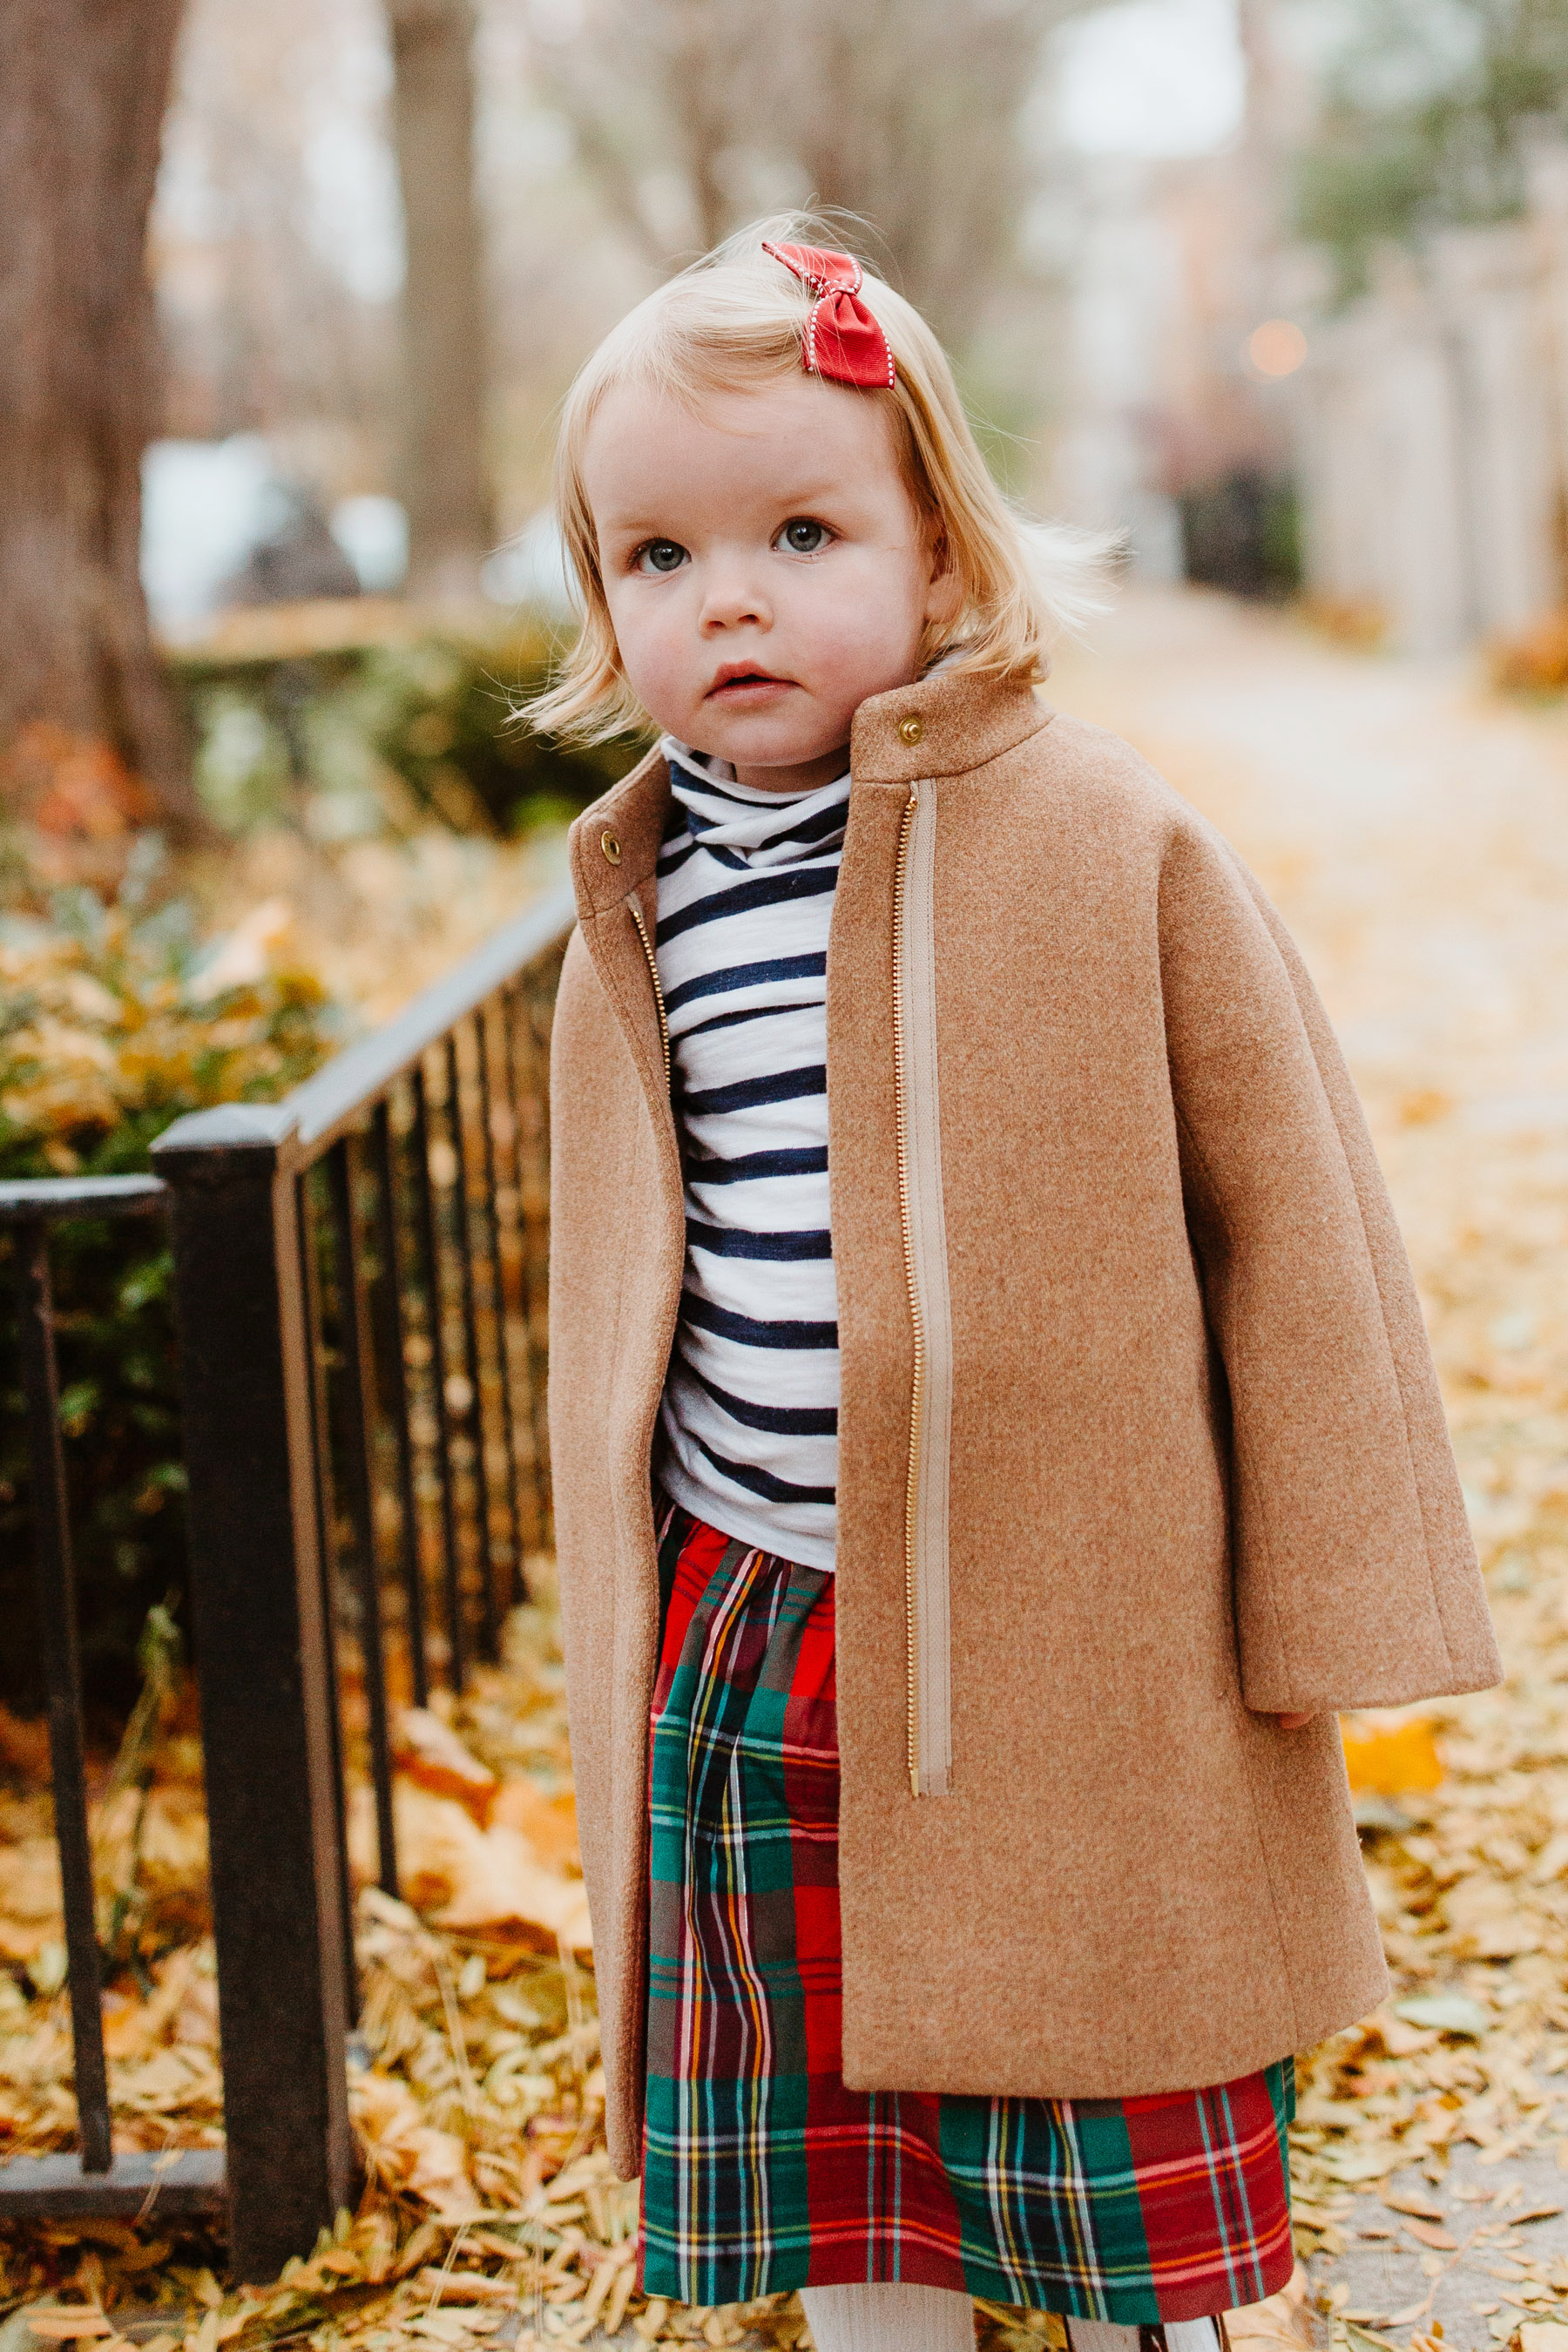 Emma's Outfit: Plaid Skirt, Toddler Cocoon Coat, Striped Turtleneck